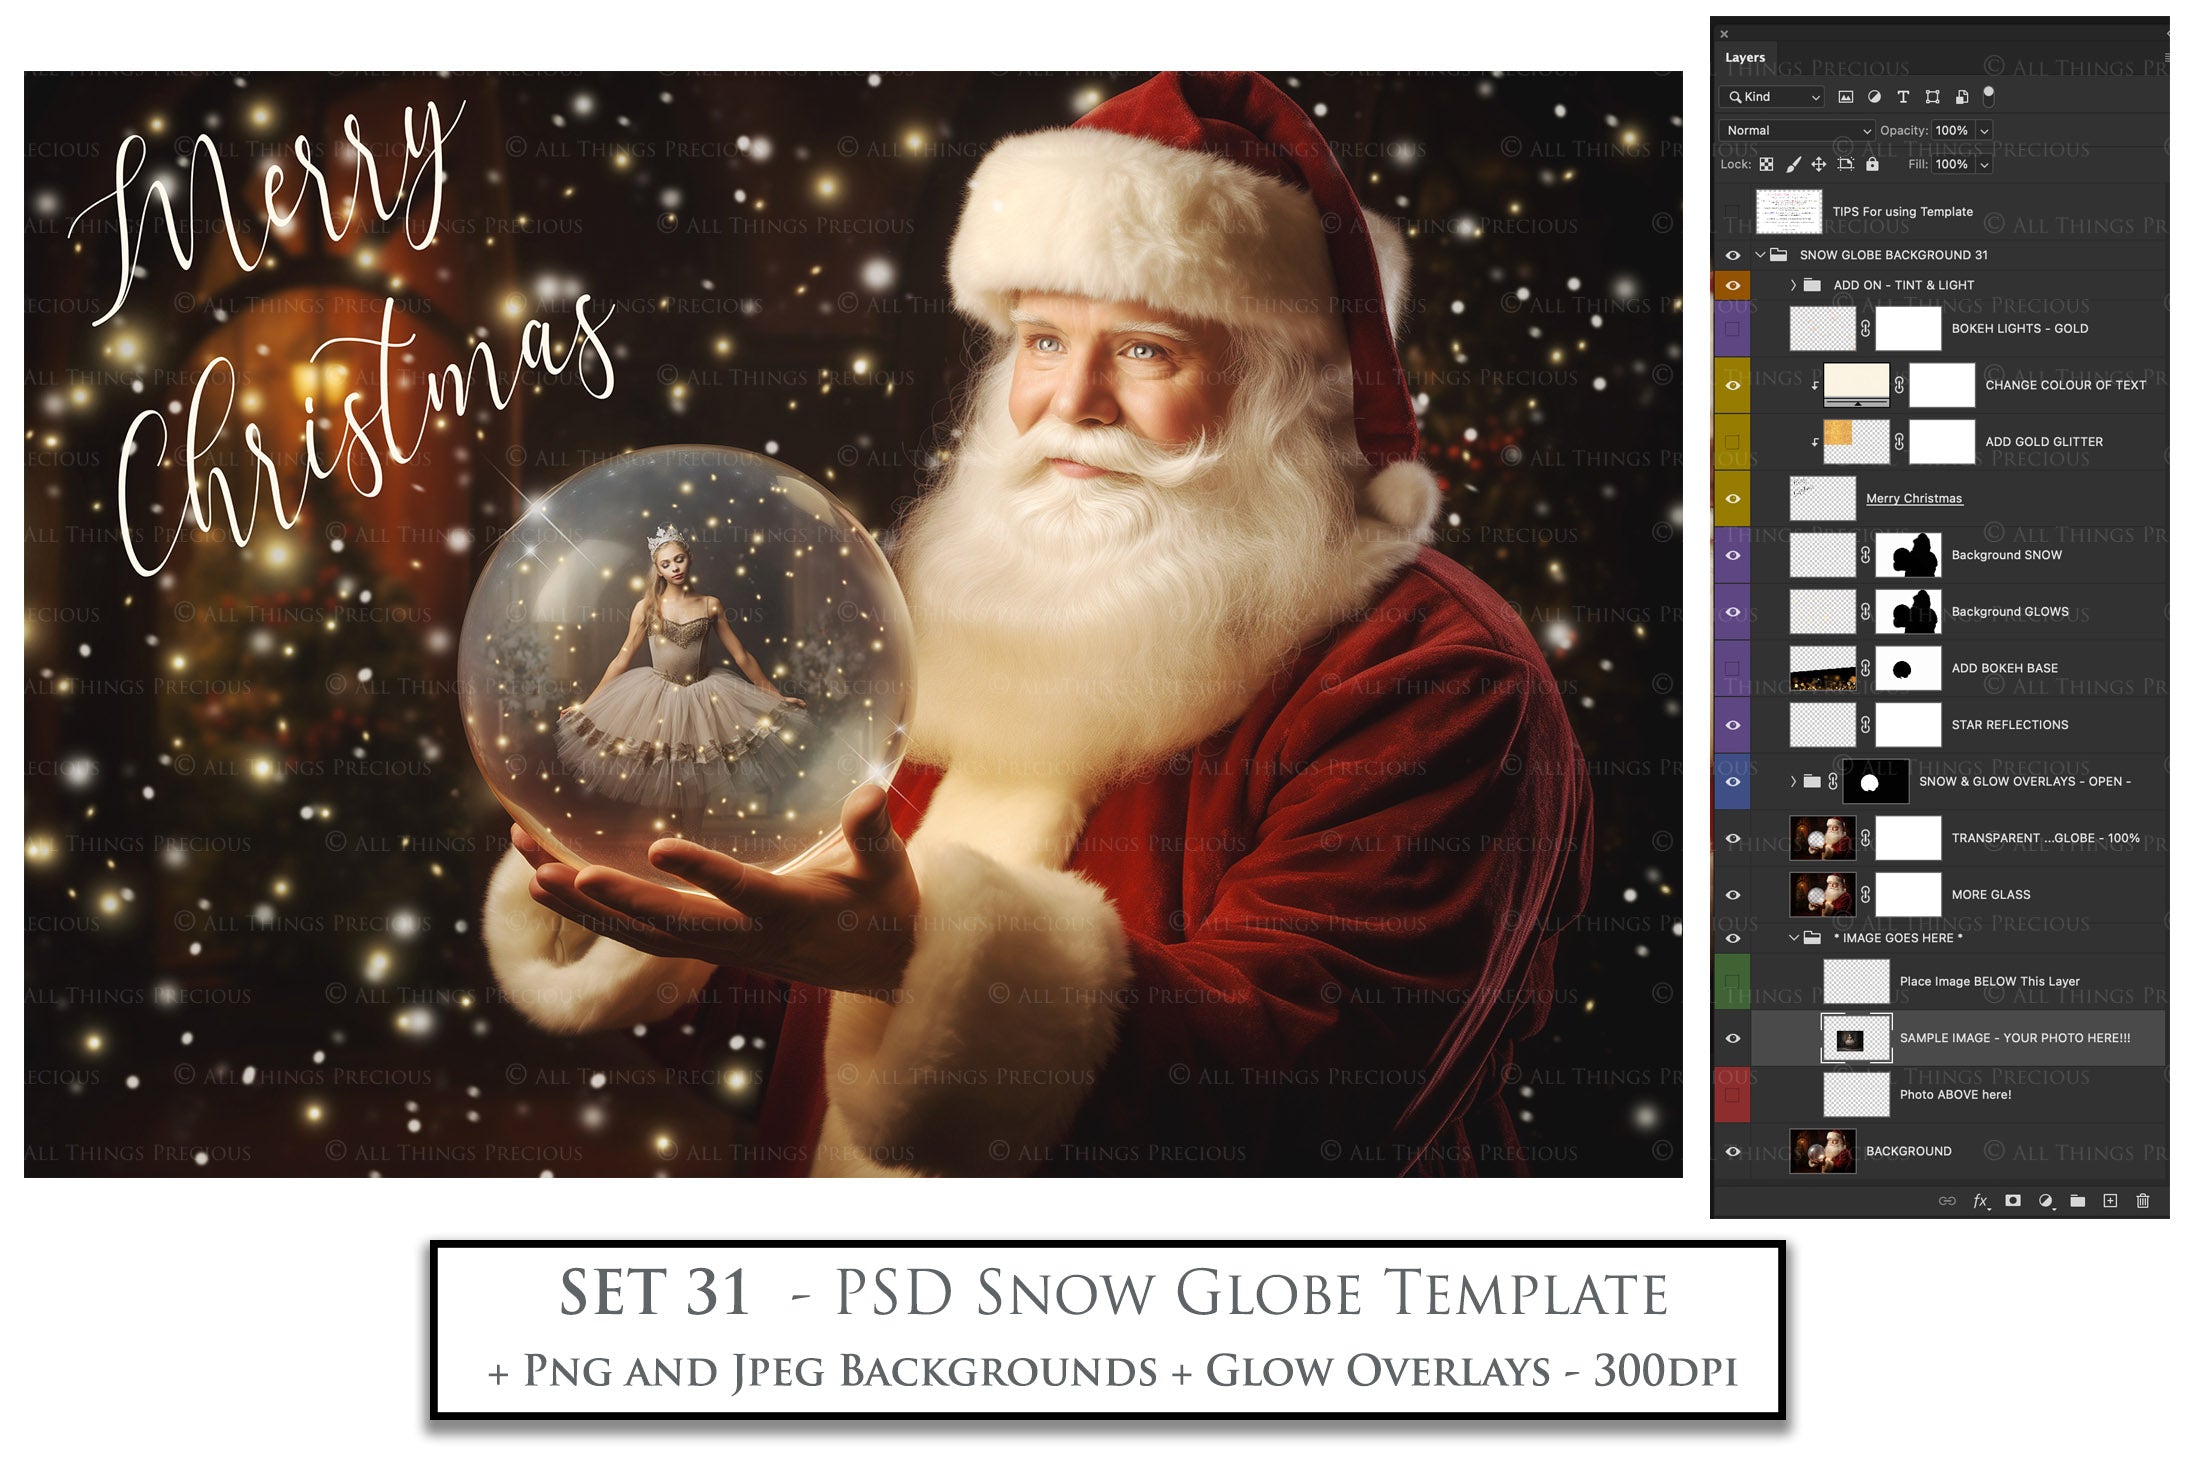 Digital Snow Globe Background, with Png snow overlays & PSD Template. The globe is transparent, perfect for adding your own images and retain the glass effect.The file is 6000 x 4000, 300dpi. Png Included. Use for Christmas edits, Photography, Card Crafts, Scrapbooking. Xmas Backdrops. Santa holding a glass ball.